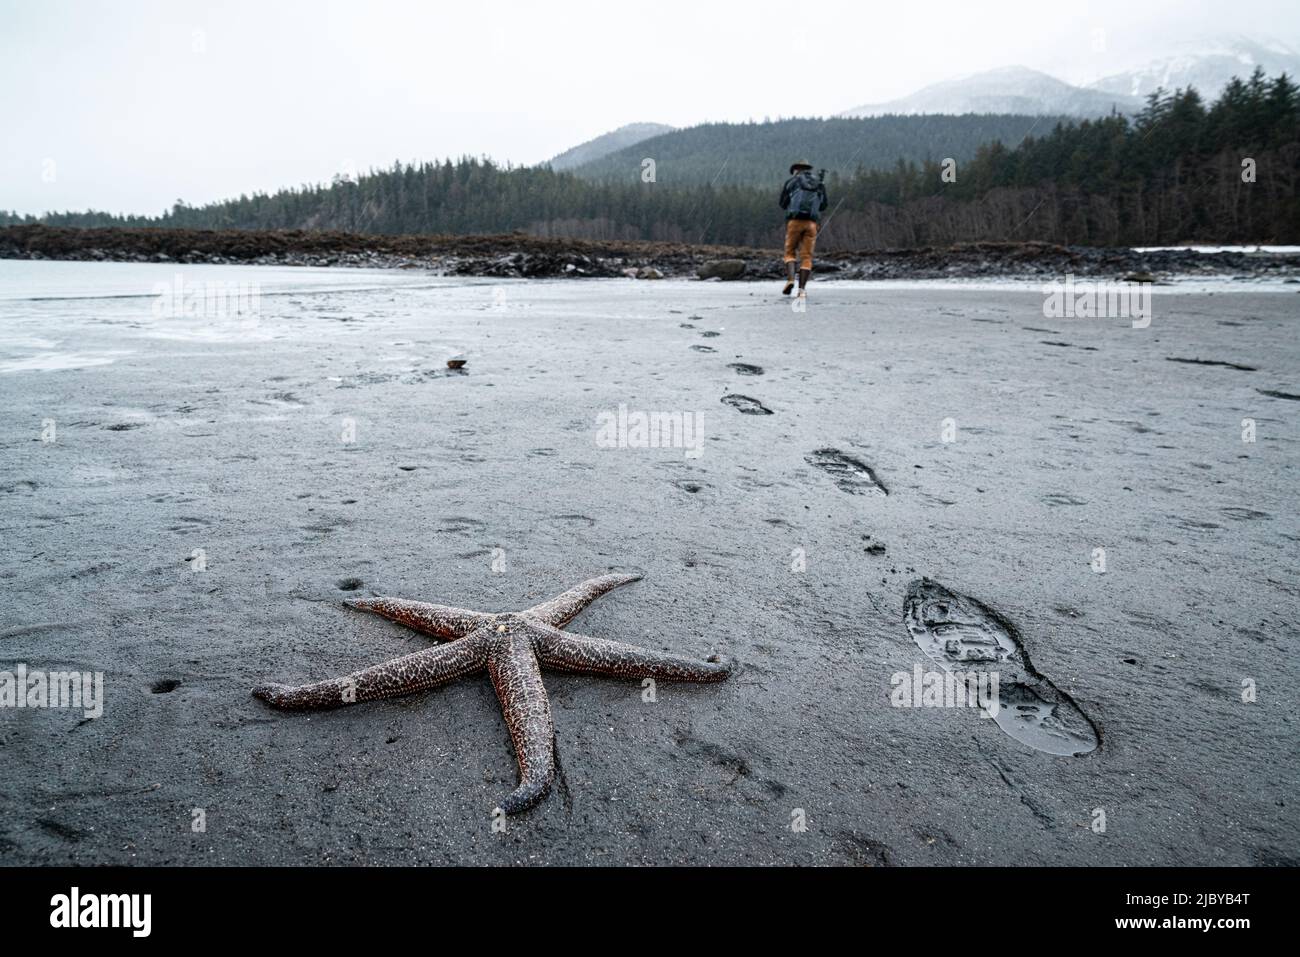 Walking down the beach at a low tide in Juneau, AK. A mottled seastar sits and waits for the tide to return. Stock Photo